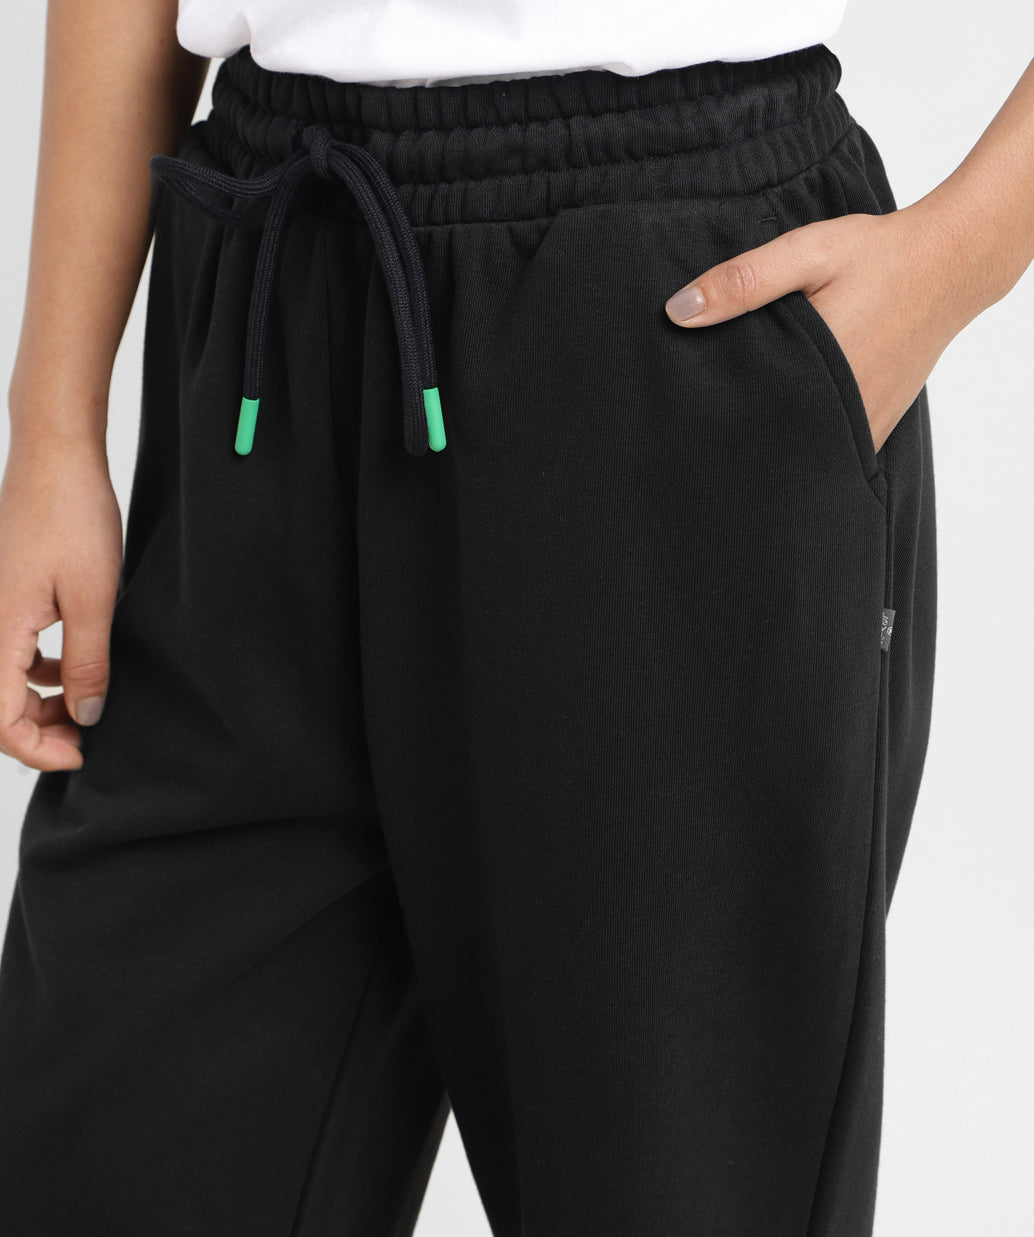 Yoga Pants with Pockets Women High-waisted Casual Trouse Ripped Matching  Color Spliced Long Harem Work Pants